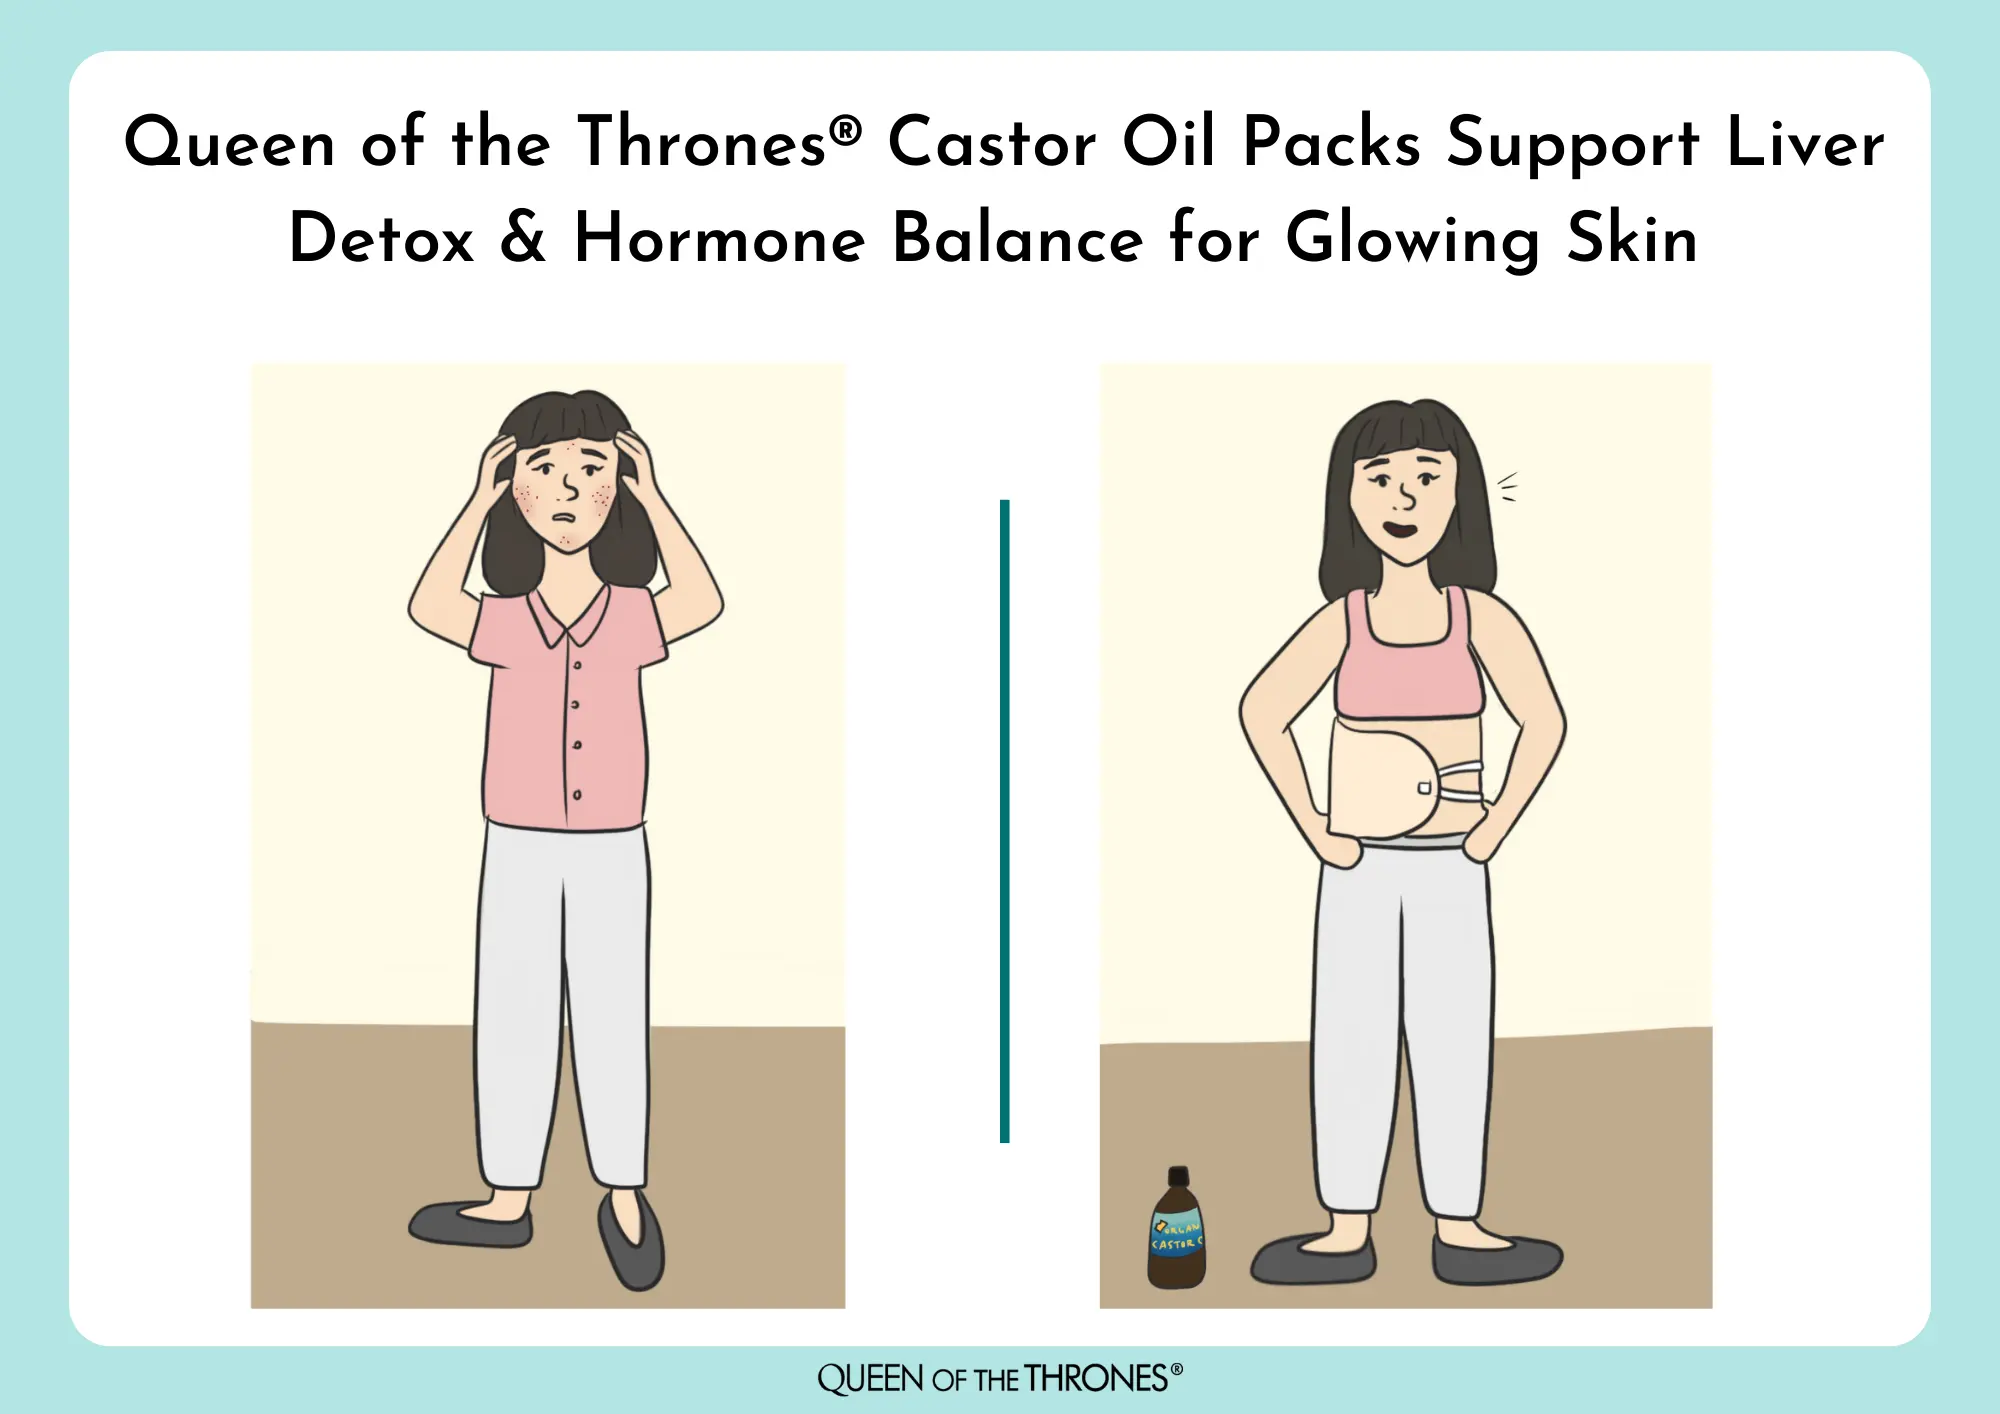 Queen of the Thrones Castor Oil Pack support Hormone Balance for a Glowing Skin